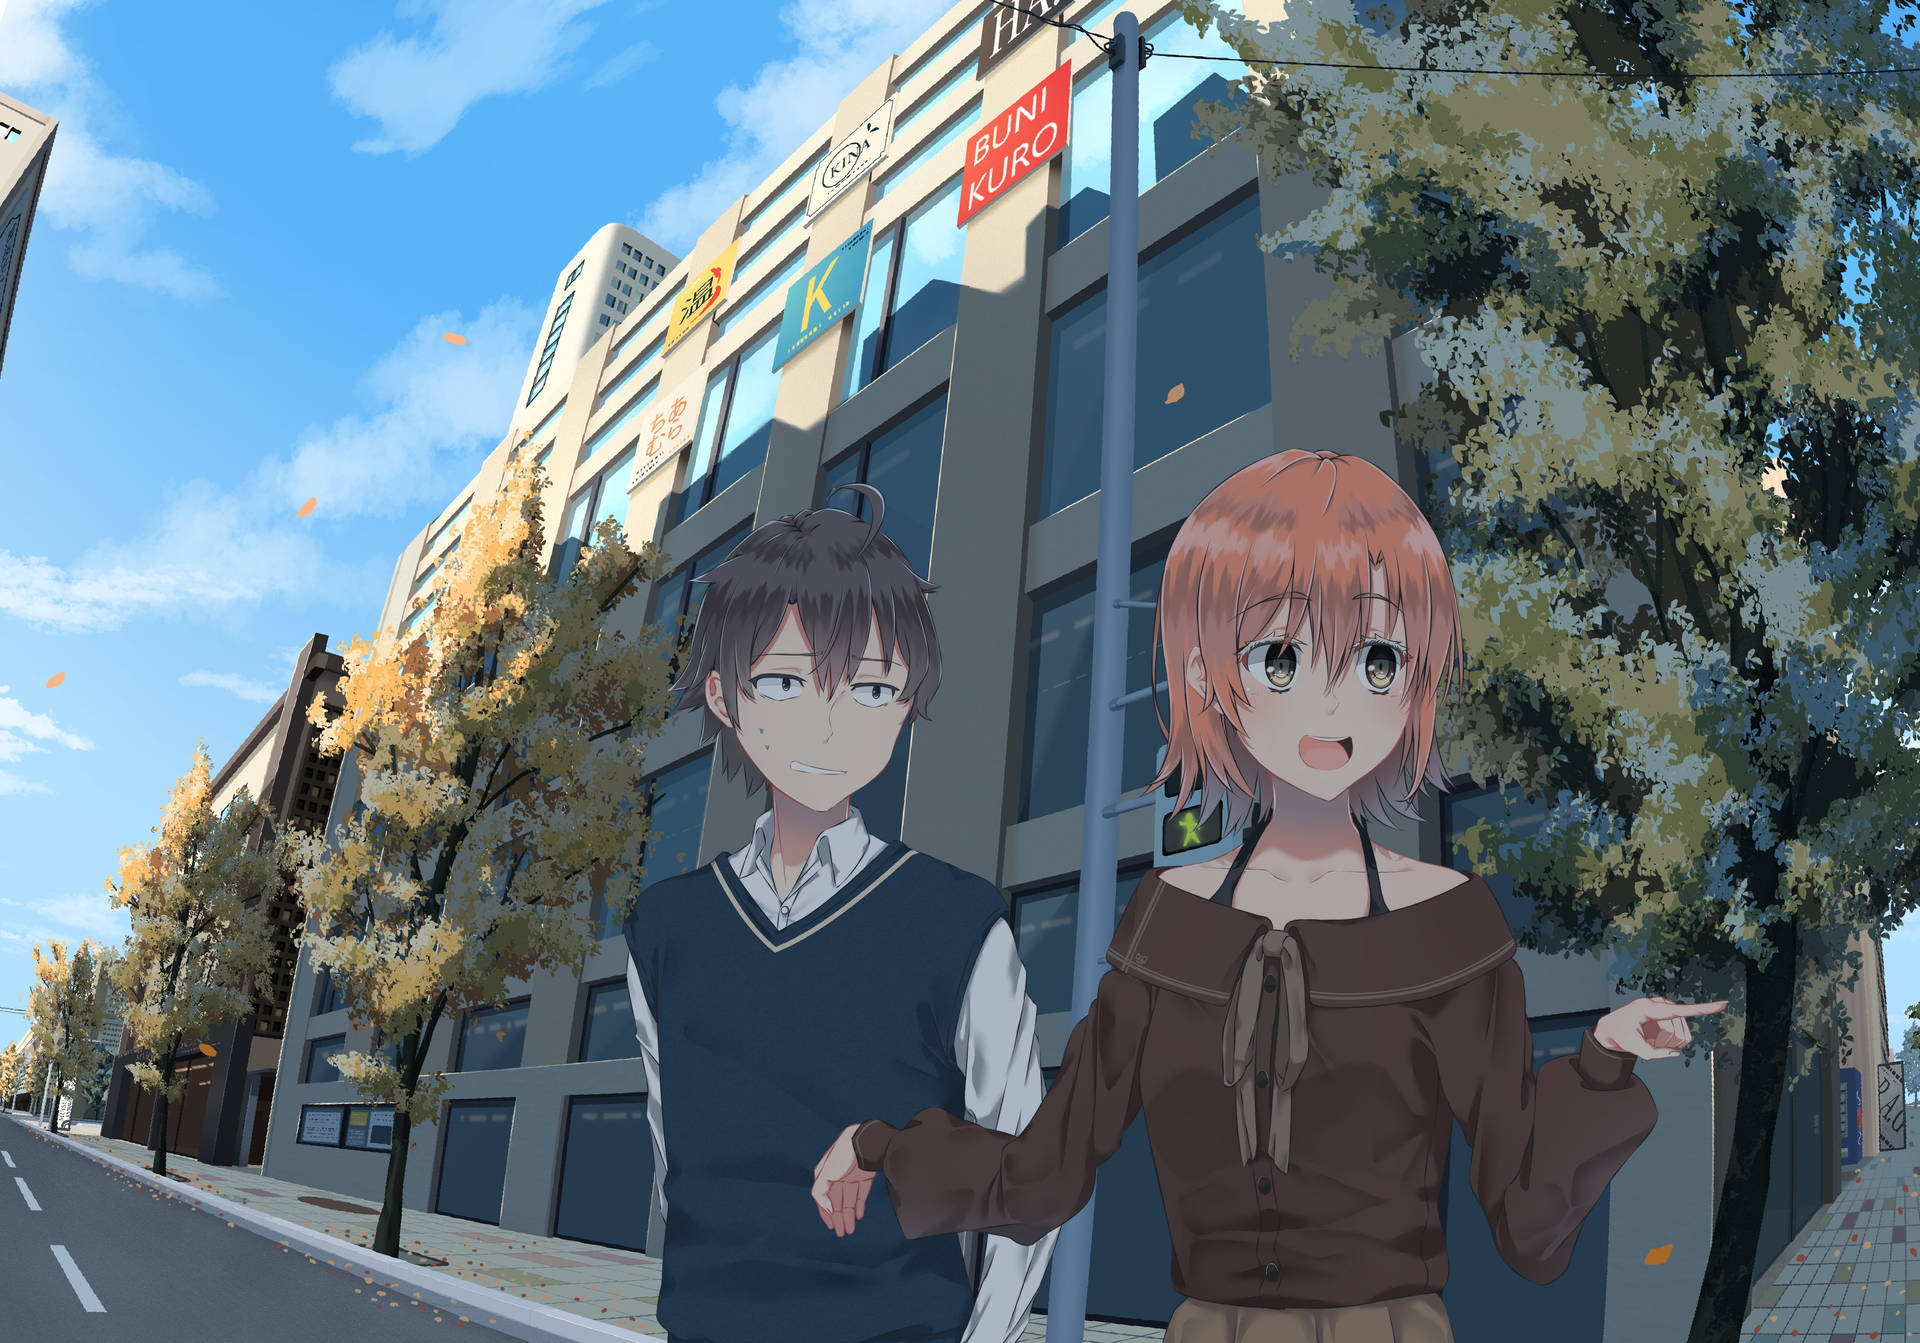 Cute Anime Couple In The City Background